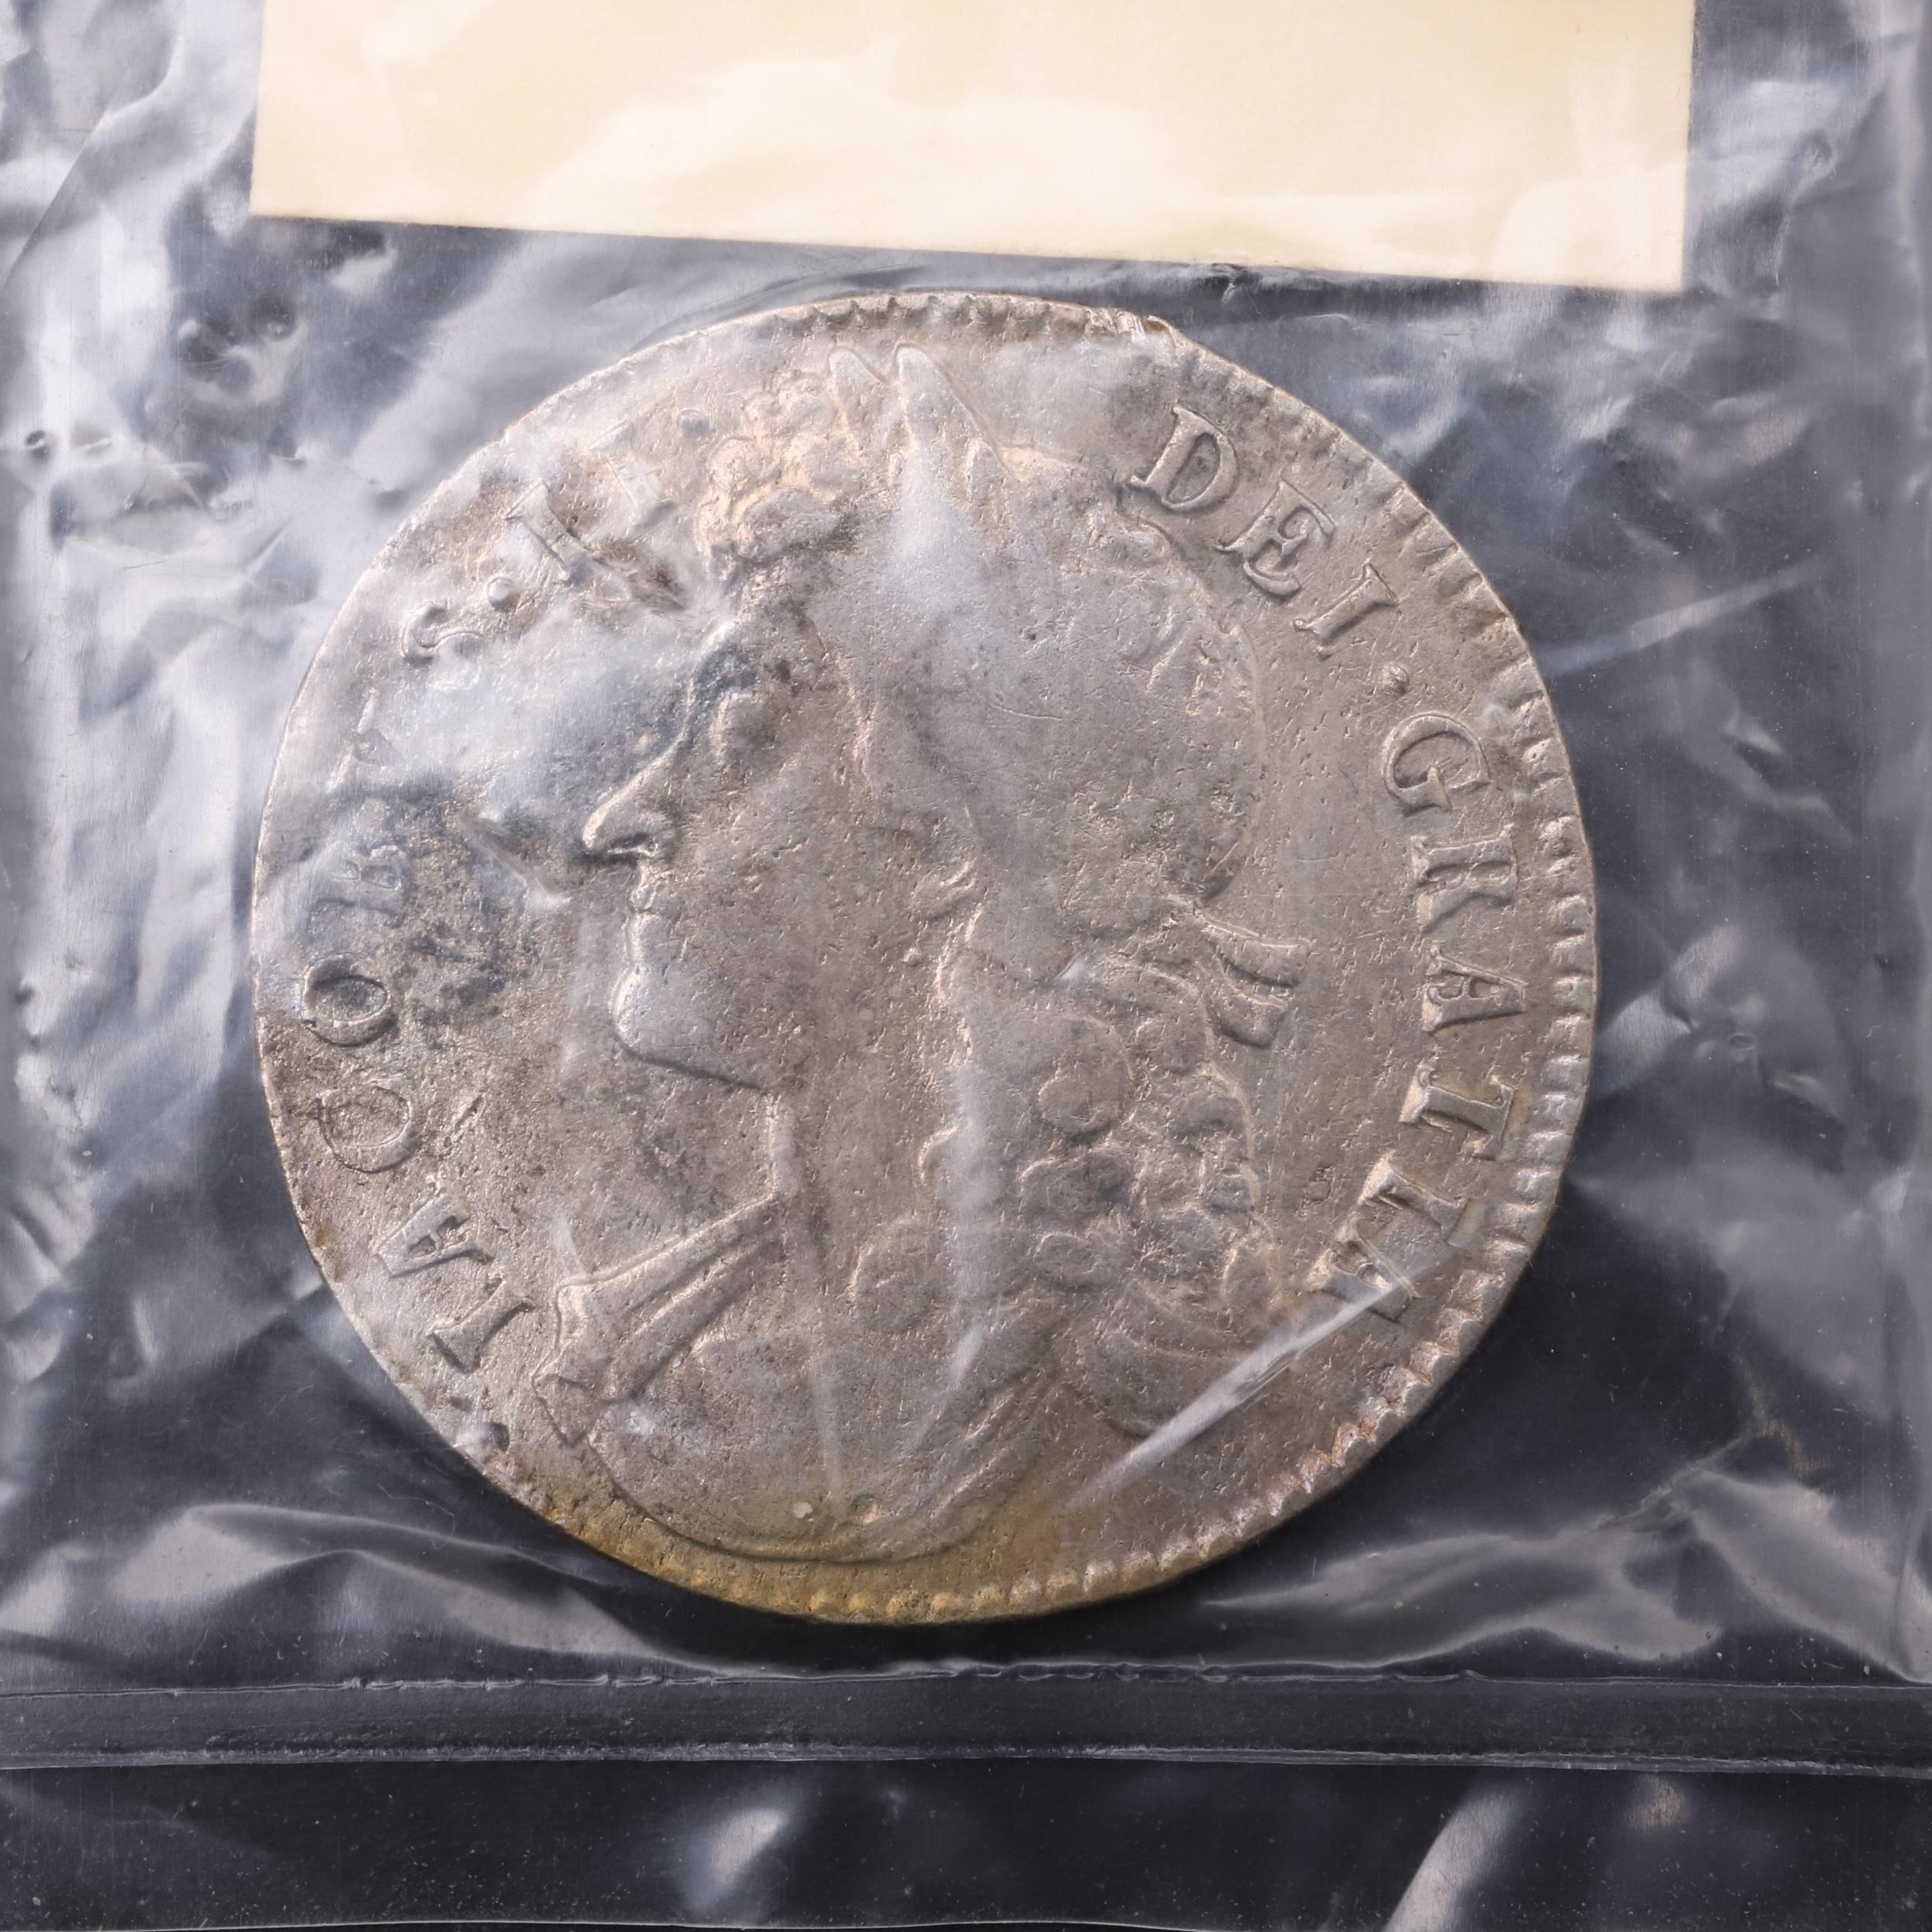 A JAMES II HALFCROWN, 1688, FROM THE WRECK OF THE ASSOCIATION.